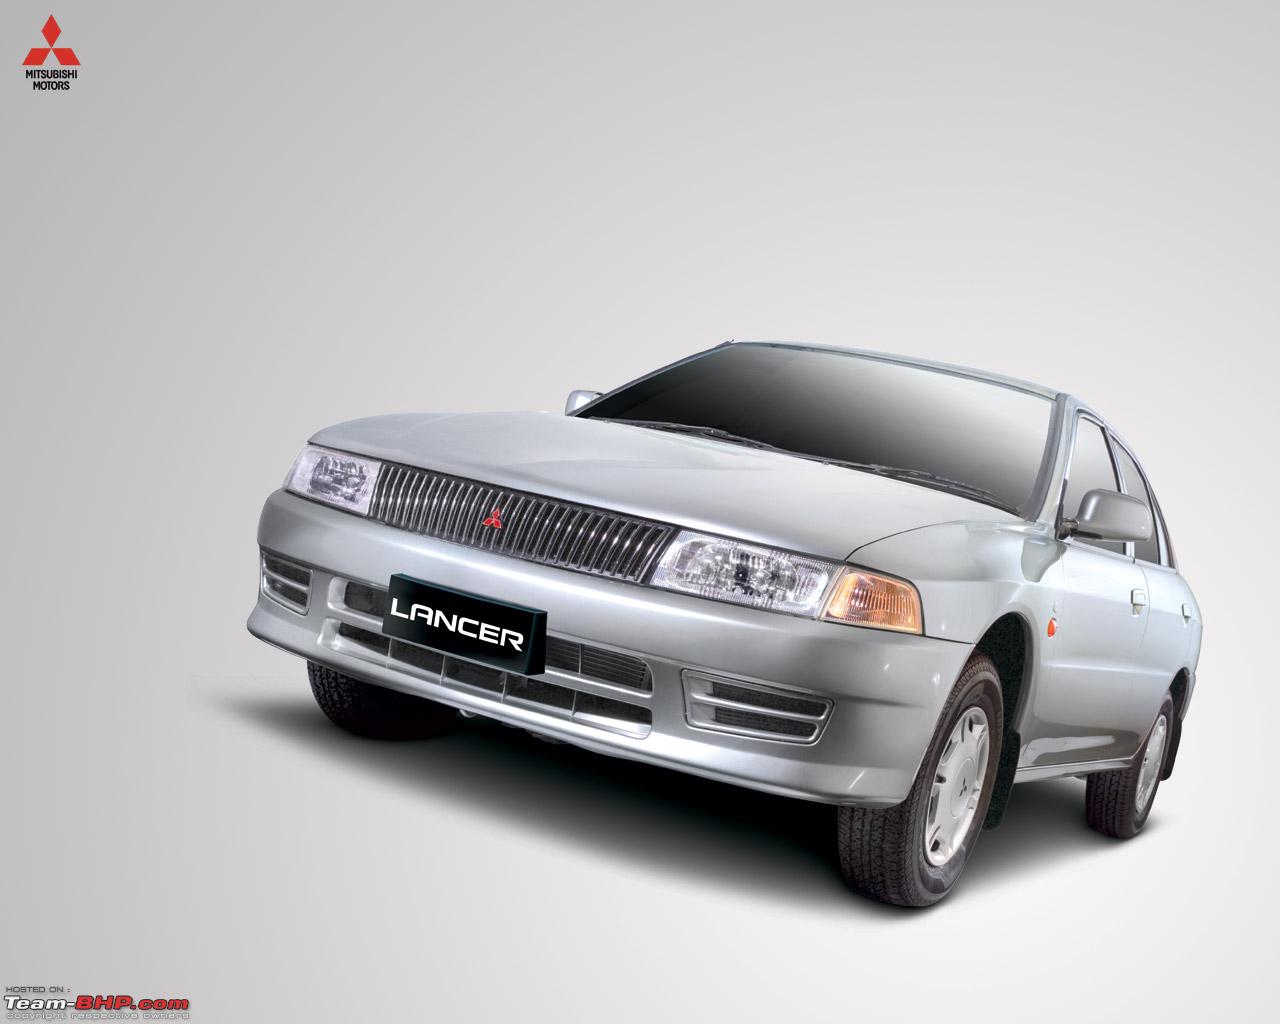 End Of The Road For The Mitsubishi Motors In India?